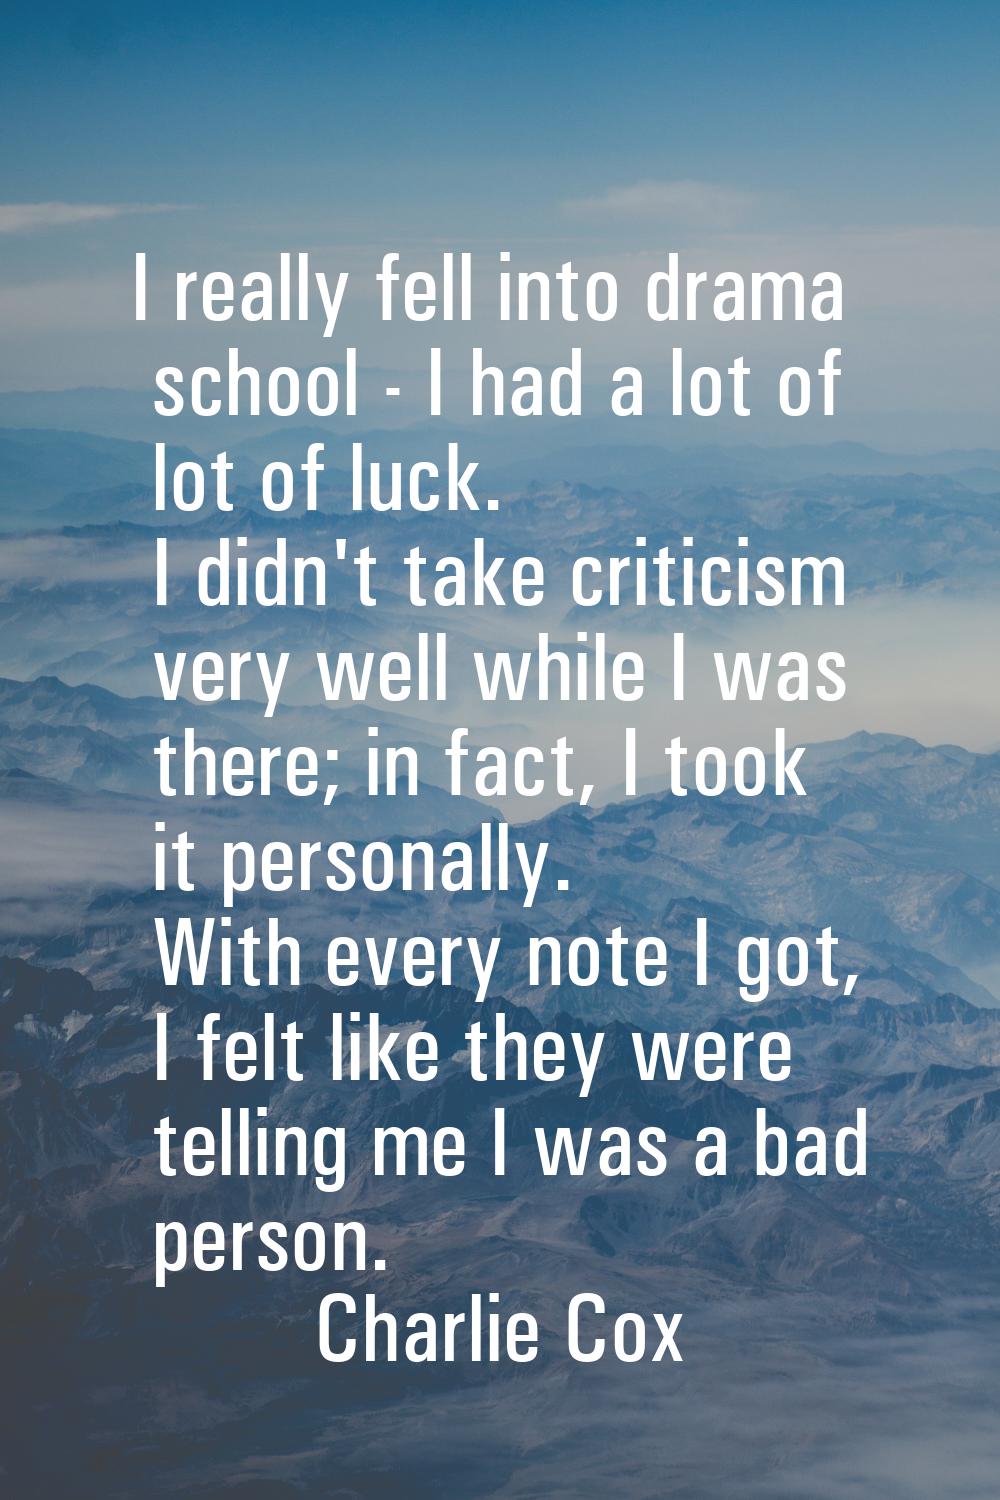 I really fell into drama school - I had a lot of lot of luck. I didn't take criticism very well whi